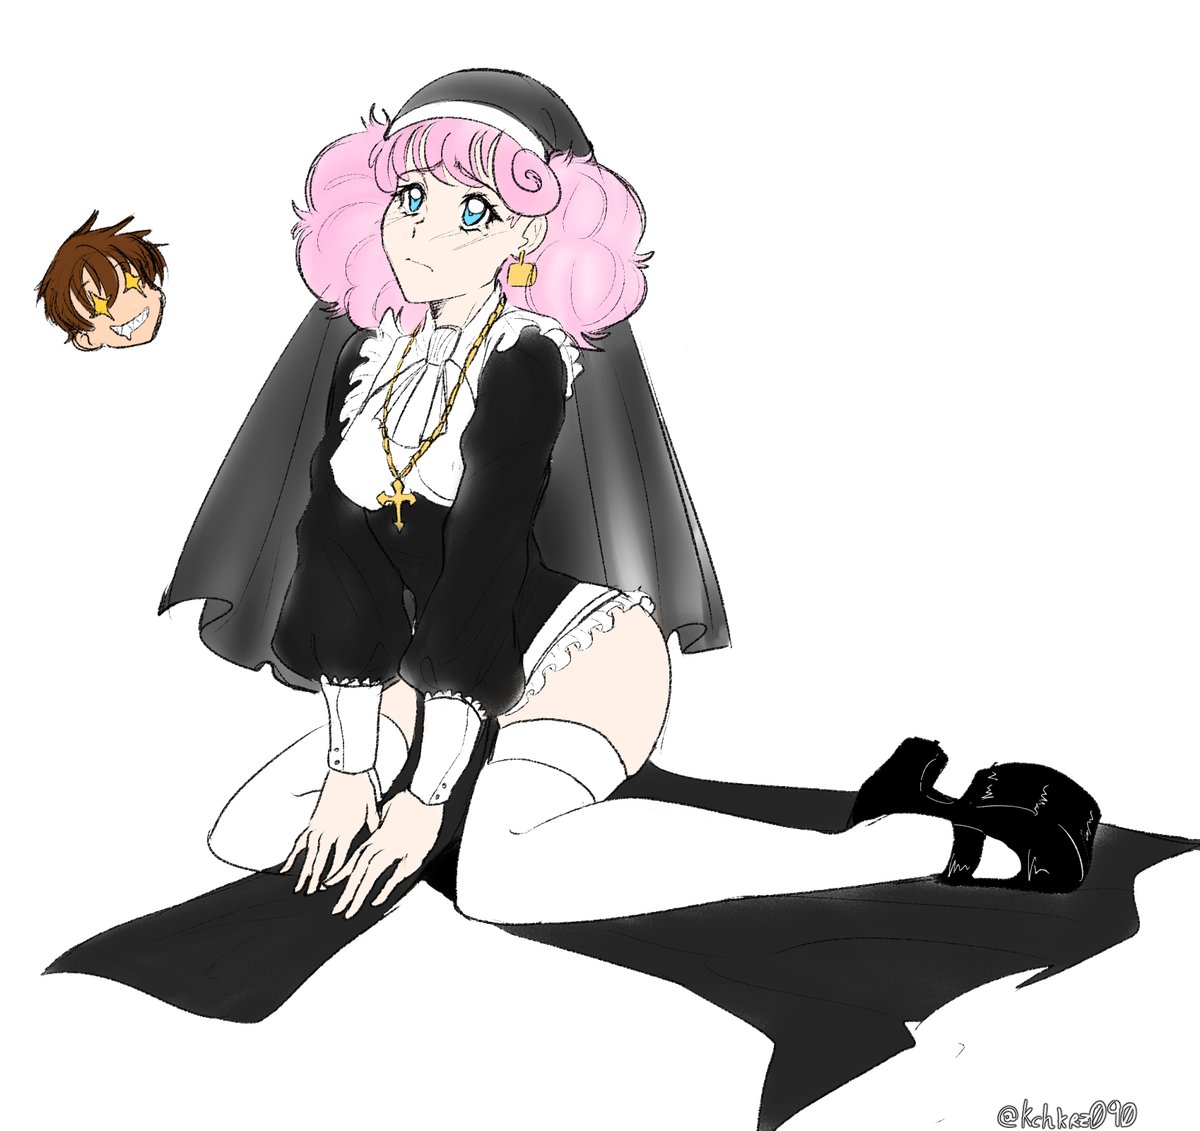 i think rance should get sill in a nun cosplay.... 

#ランスシリーズ